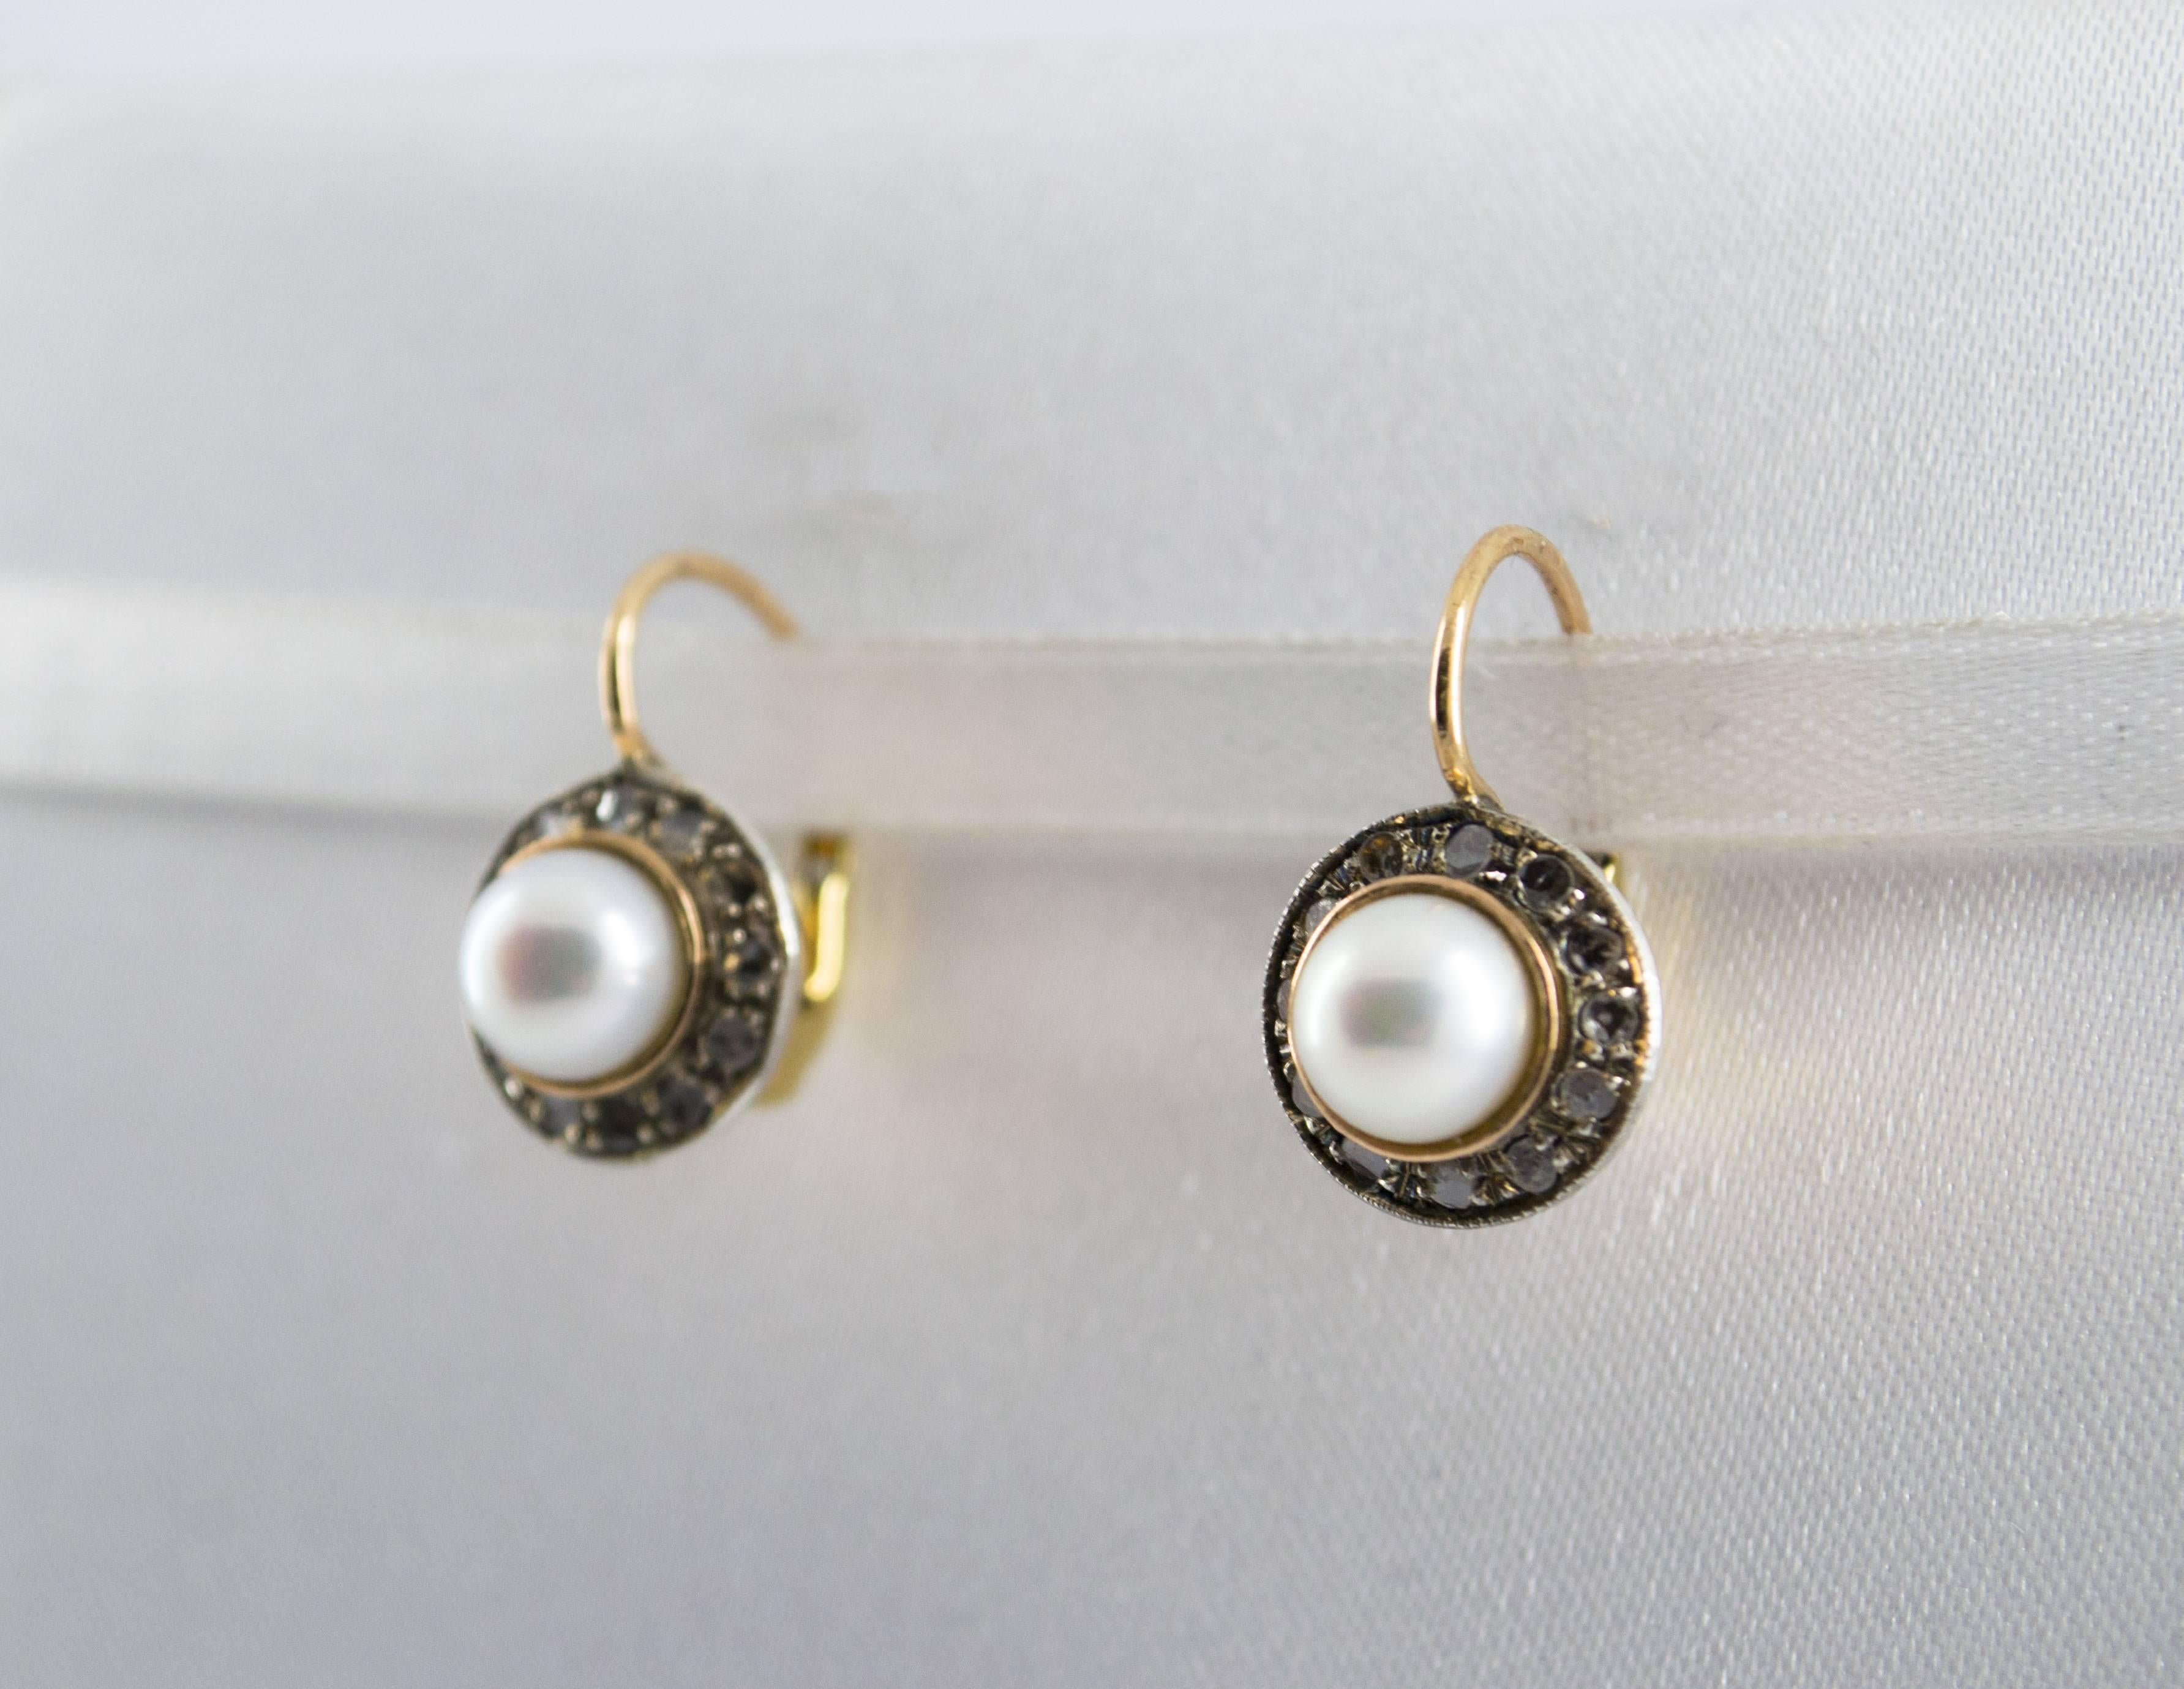 These Earrings are made of 9K Yellow Gold and Sterling Silver.
These Earrings have 0.20 Carats of White Rose Cut Diamonds.
These Earrings have also Mabe Pearls.

All our Earrings have pins for pierced ears but we can change the closure and make any